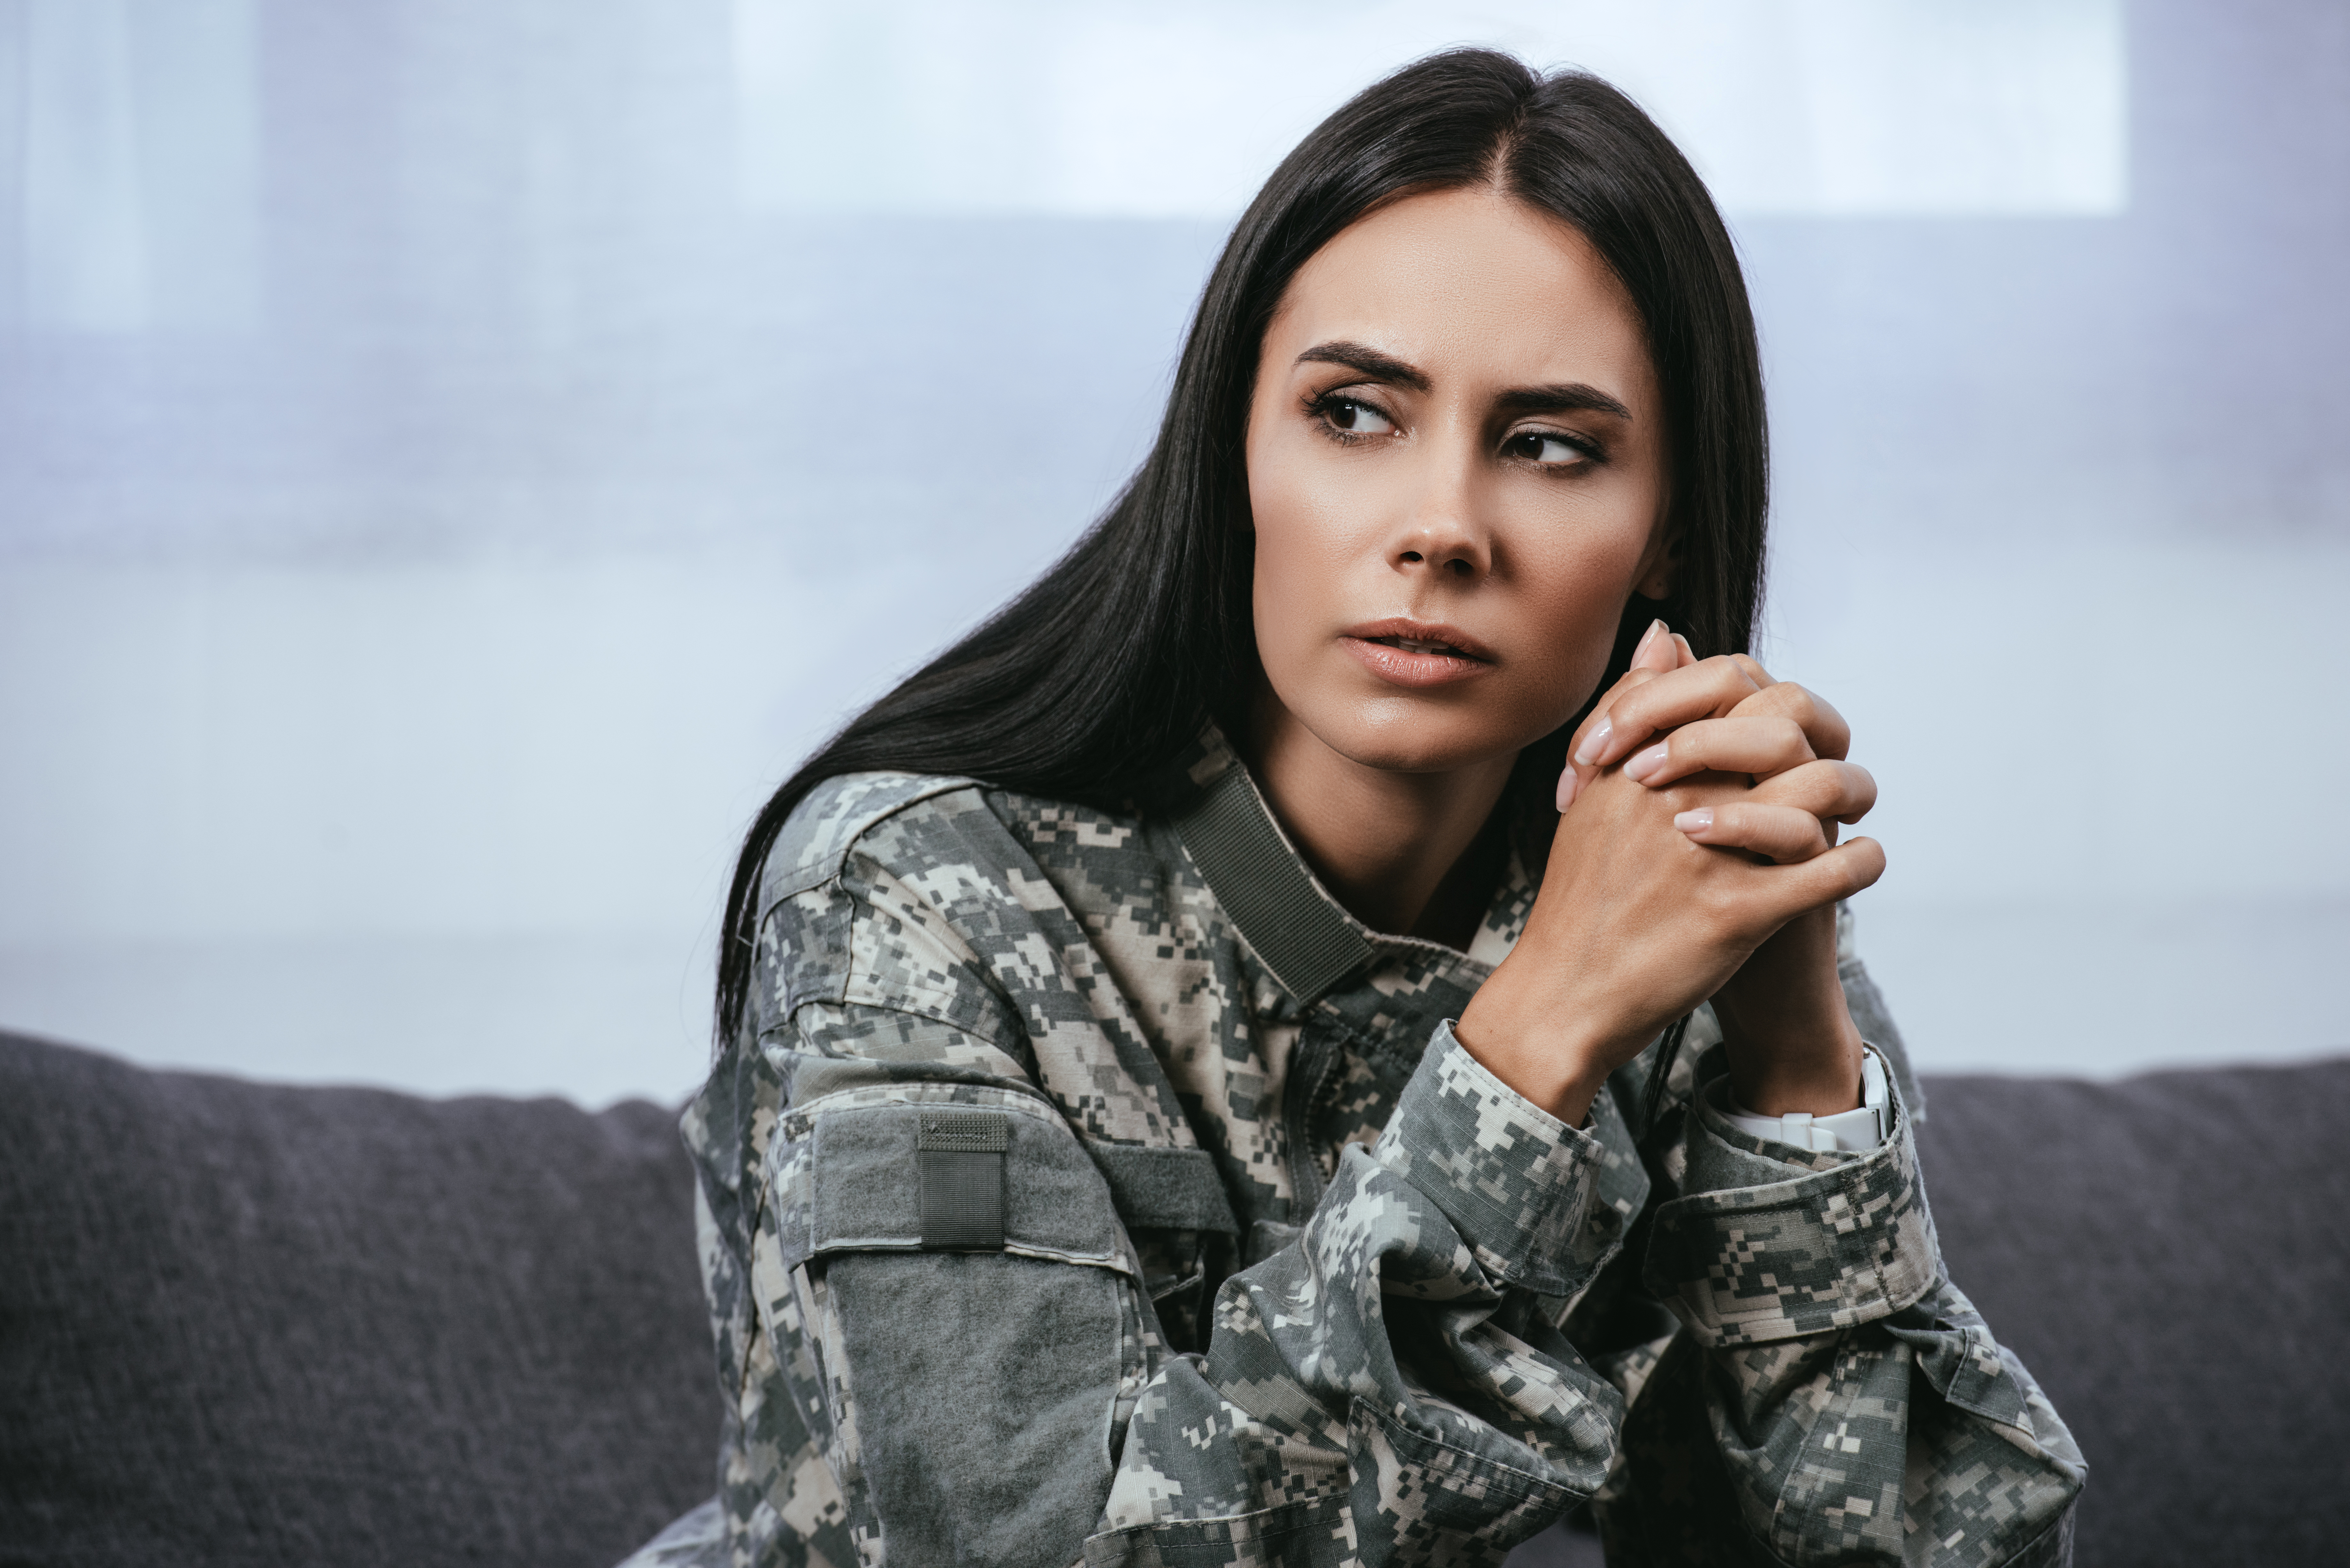 Llose-up portrait of thoughtful female soldier in military uniform with ptsd sitting on couch and looking away